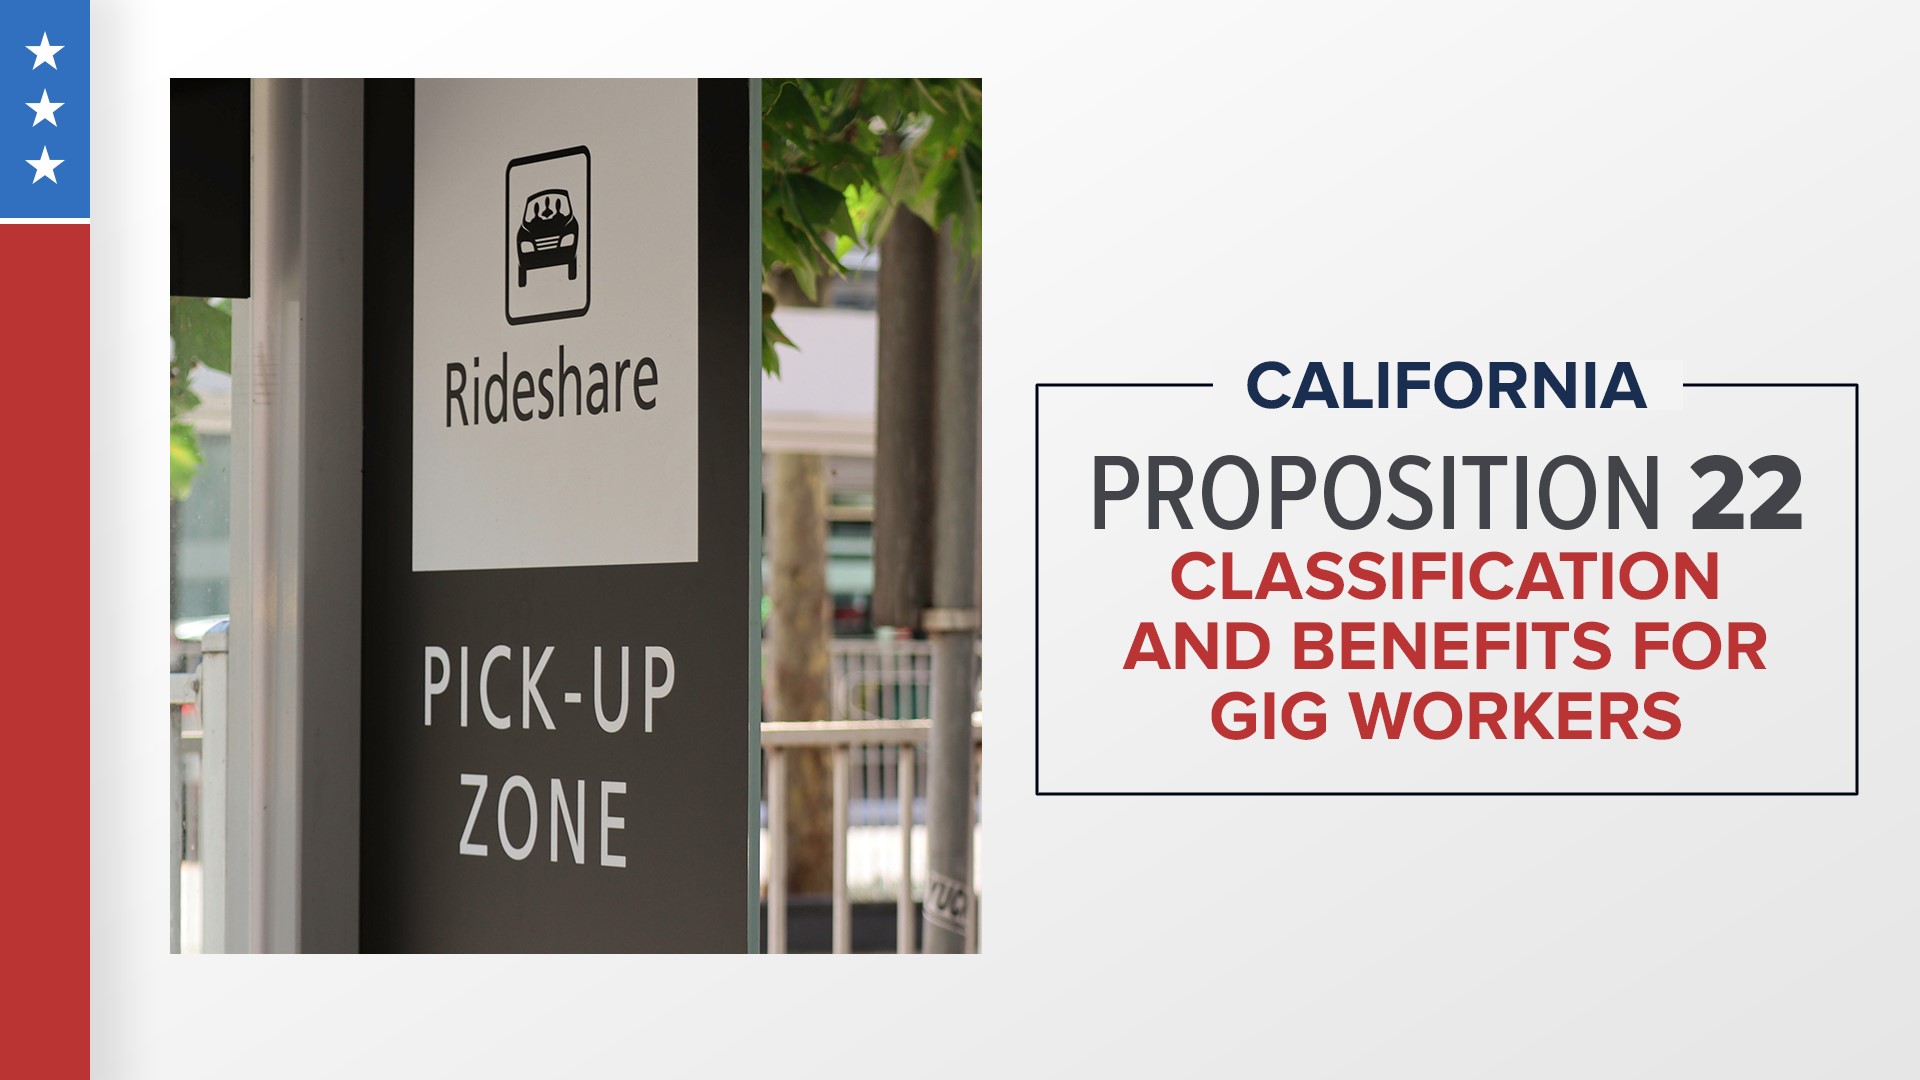 Prop 22 would exempt gig companies like Uber, Lyft, DoorDash, and Instacart from a new state law requiring them to treat workers as employees.